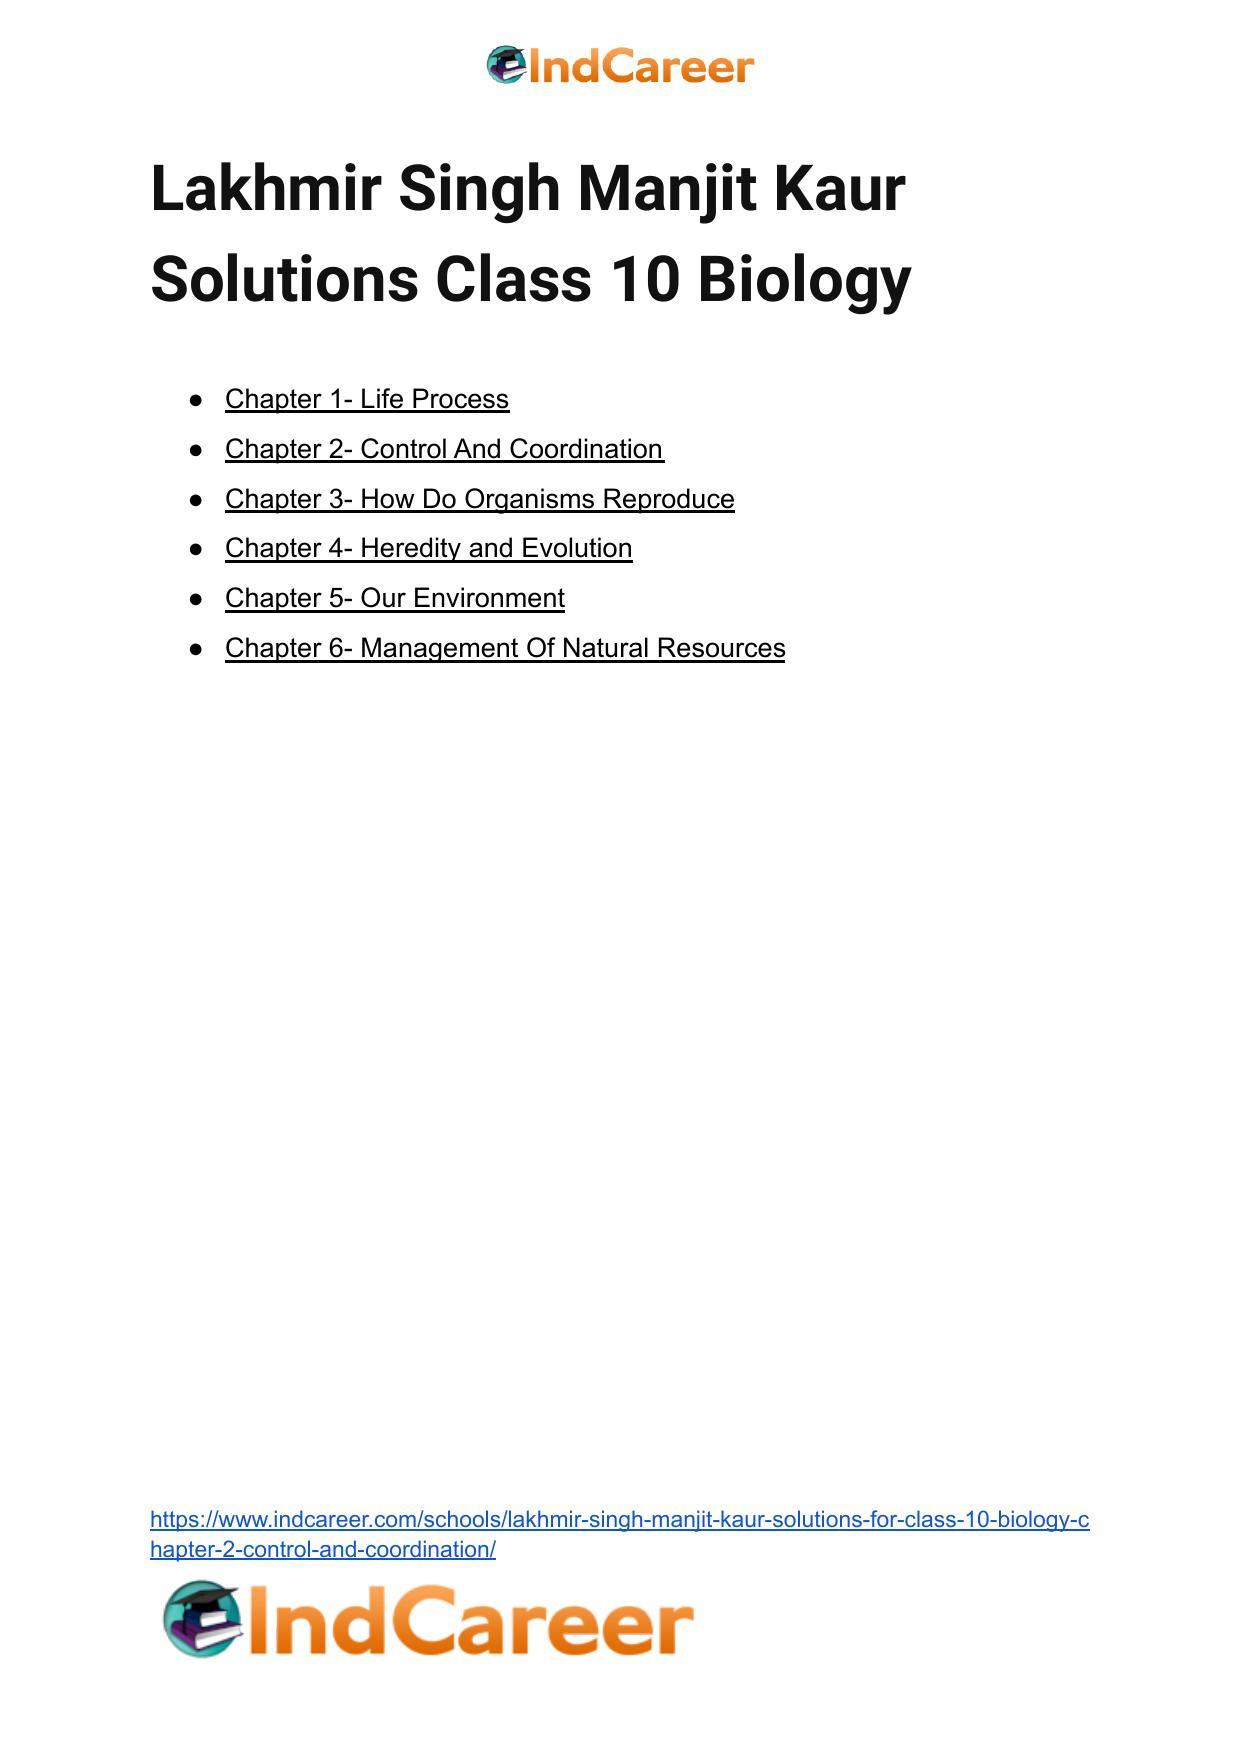 Lakhmir Singh Manjit Kaur  Solutions for Class 10 Biology: Chapter 2- Control And Coordination - Page 62